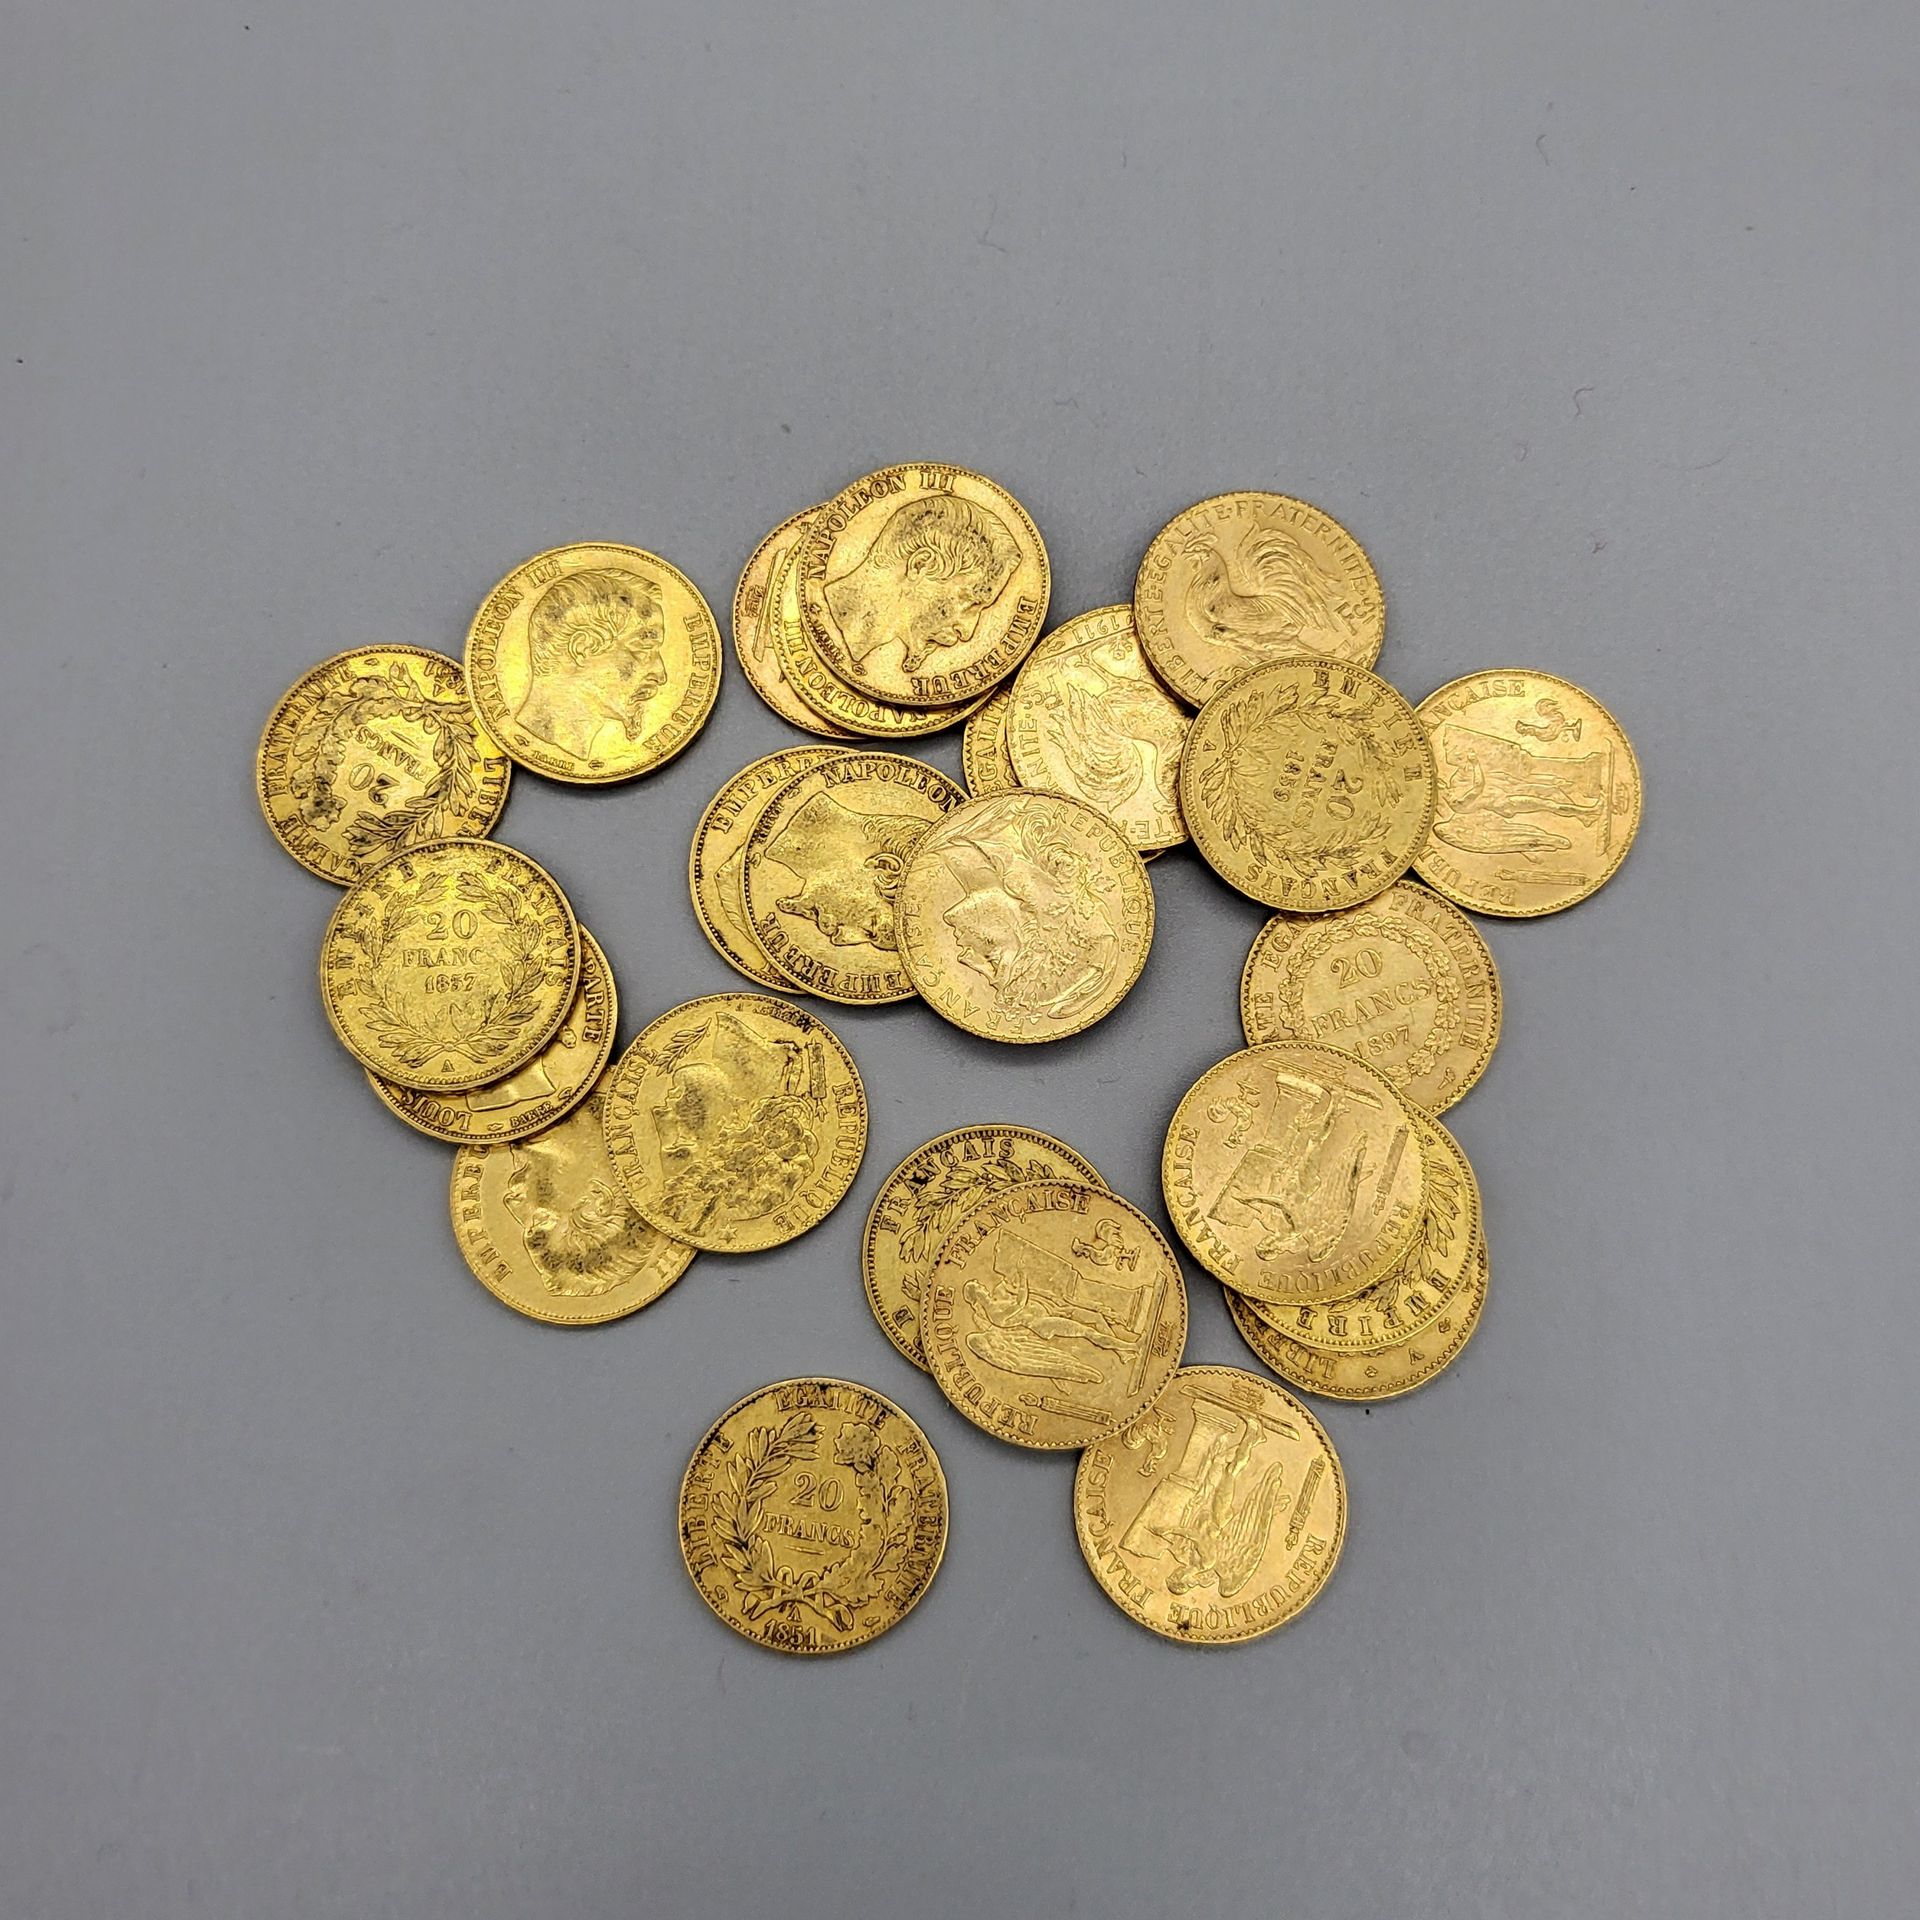 Null Lot including:
- Three 20-franc gold coins, Ceres, dated 1851.
- Ten 20-fra&hellip;